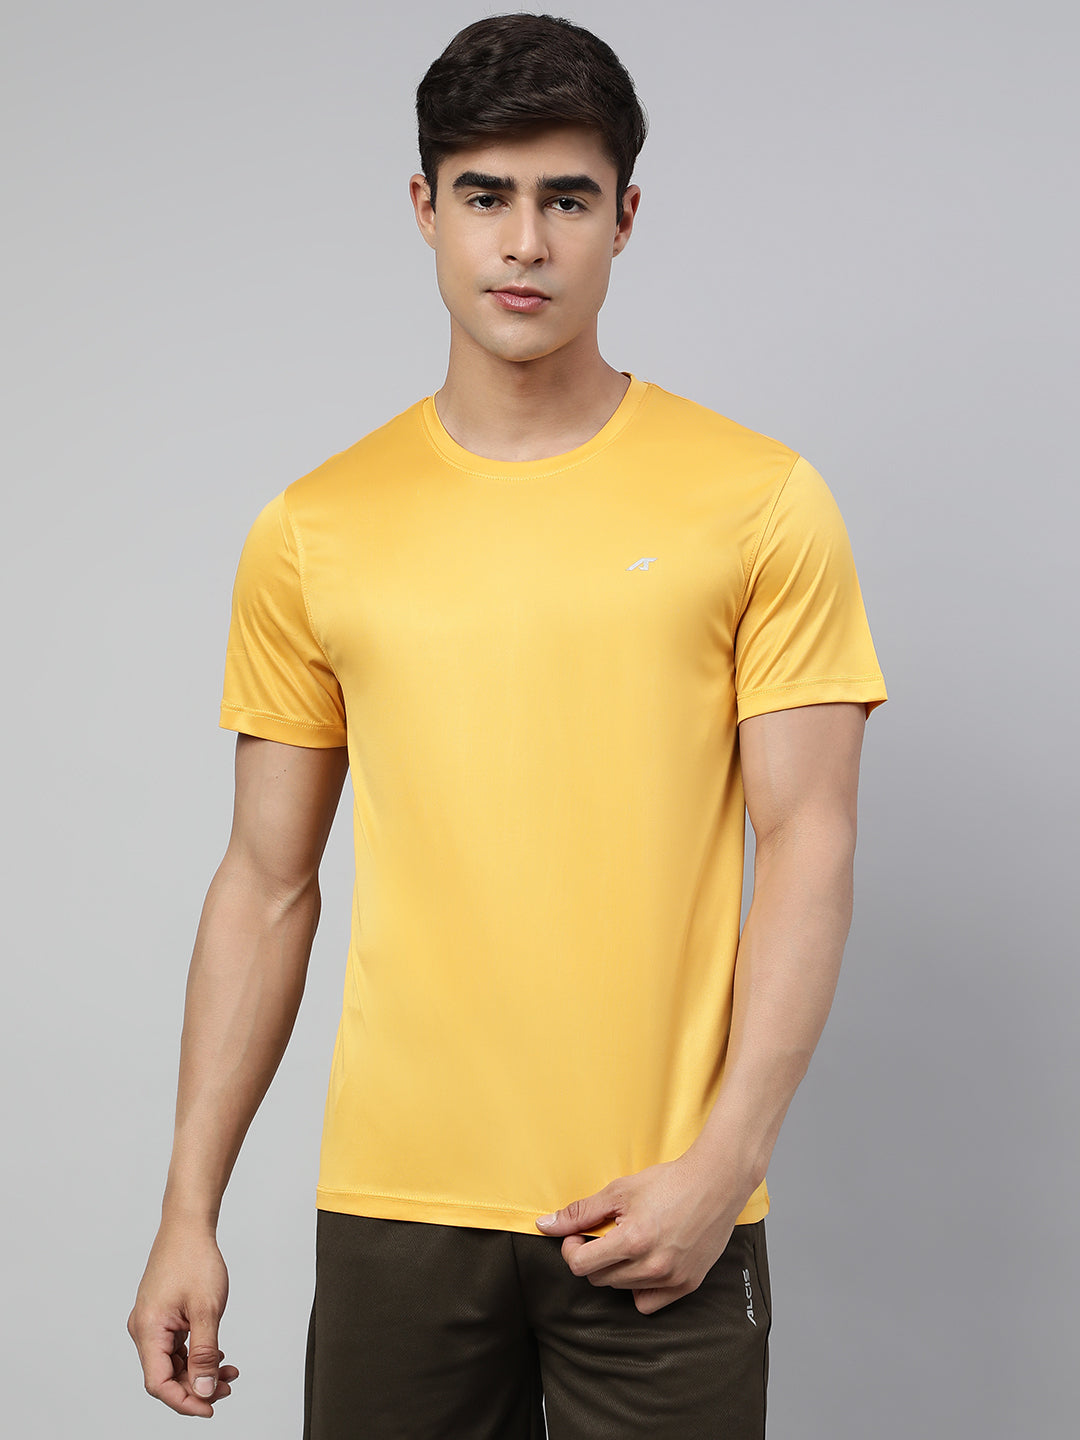 Alcis Men's Citrus Anti-Static Soft-Touch Slim-Fit Sports for All Round Neck Wonder T-Shirt